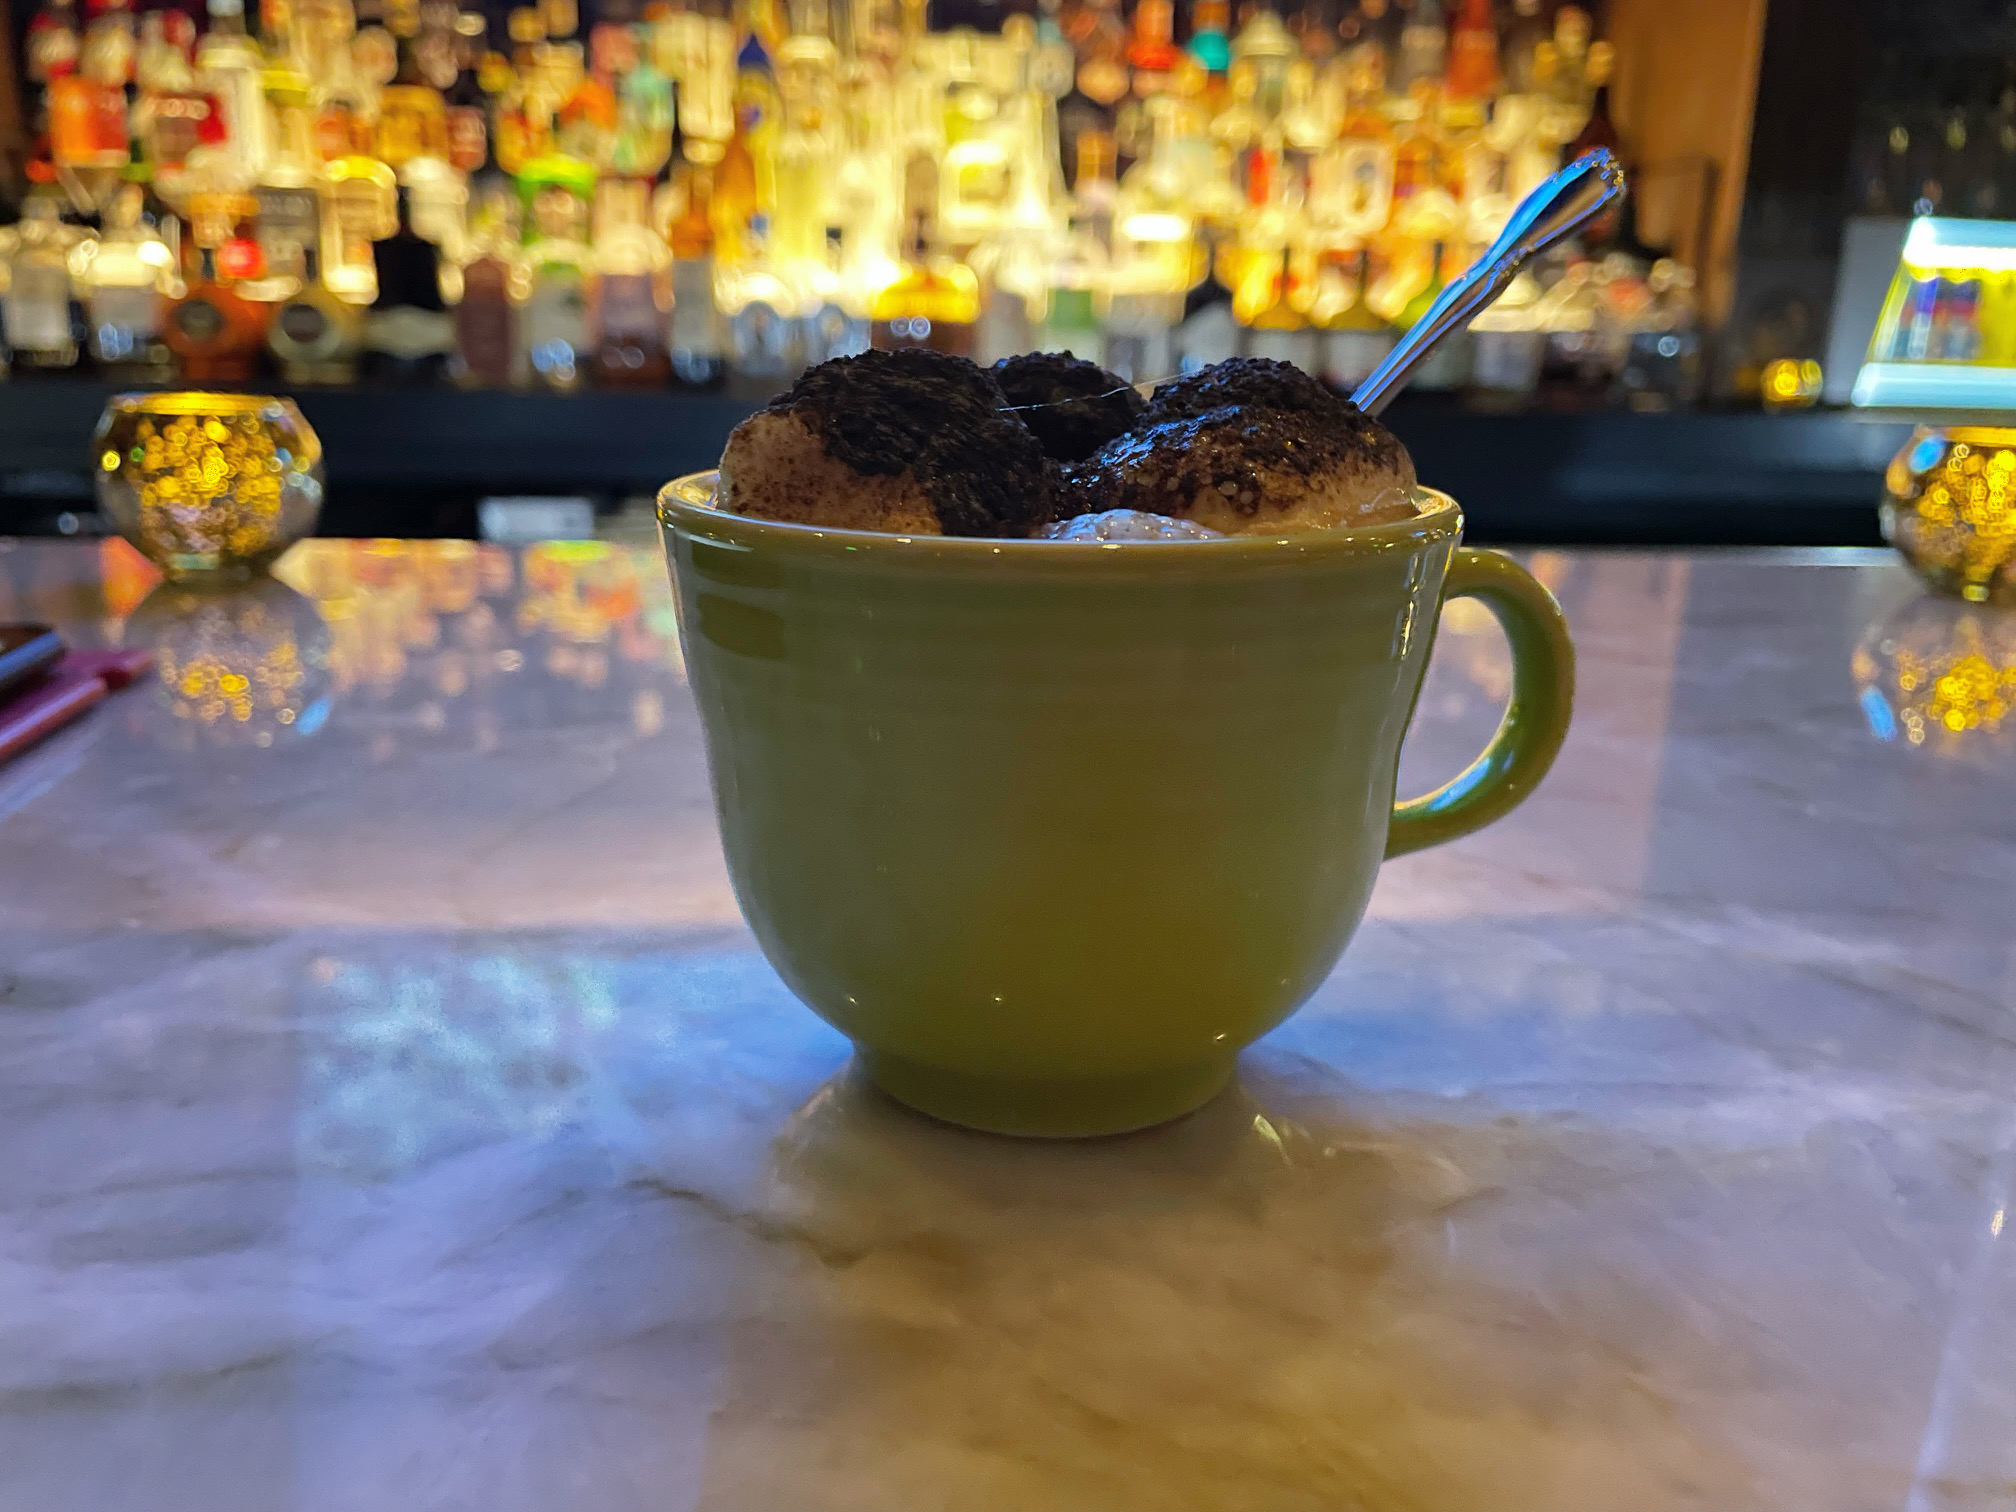 In a dimly lit bar, there is a green mug with charred marshmallows on top. Behind the drink is a bar with illuminated liquor bottles. Photo by Alyssa Buckley.